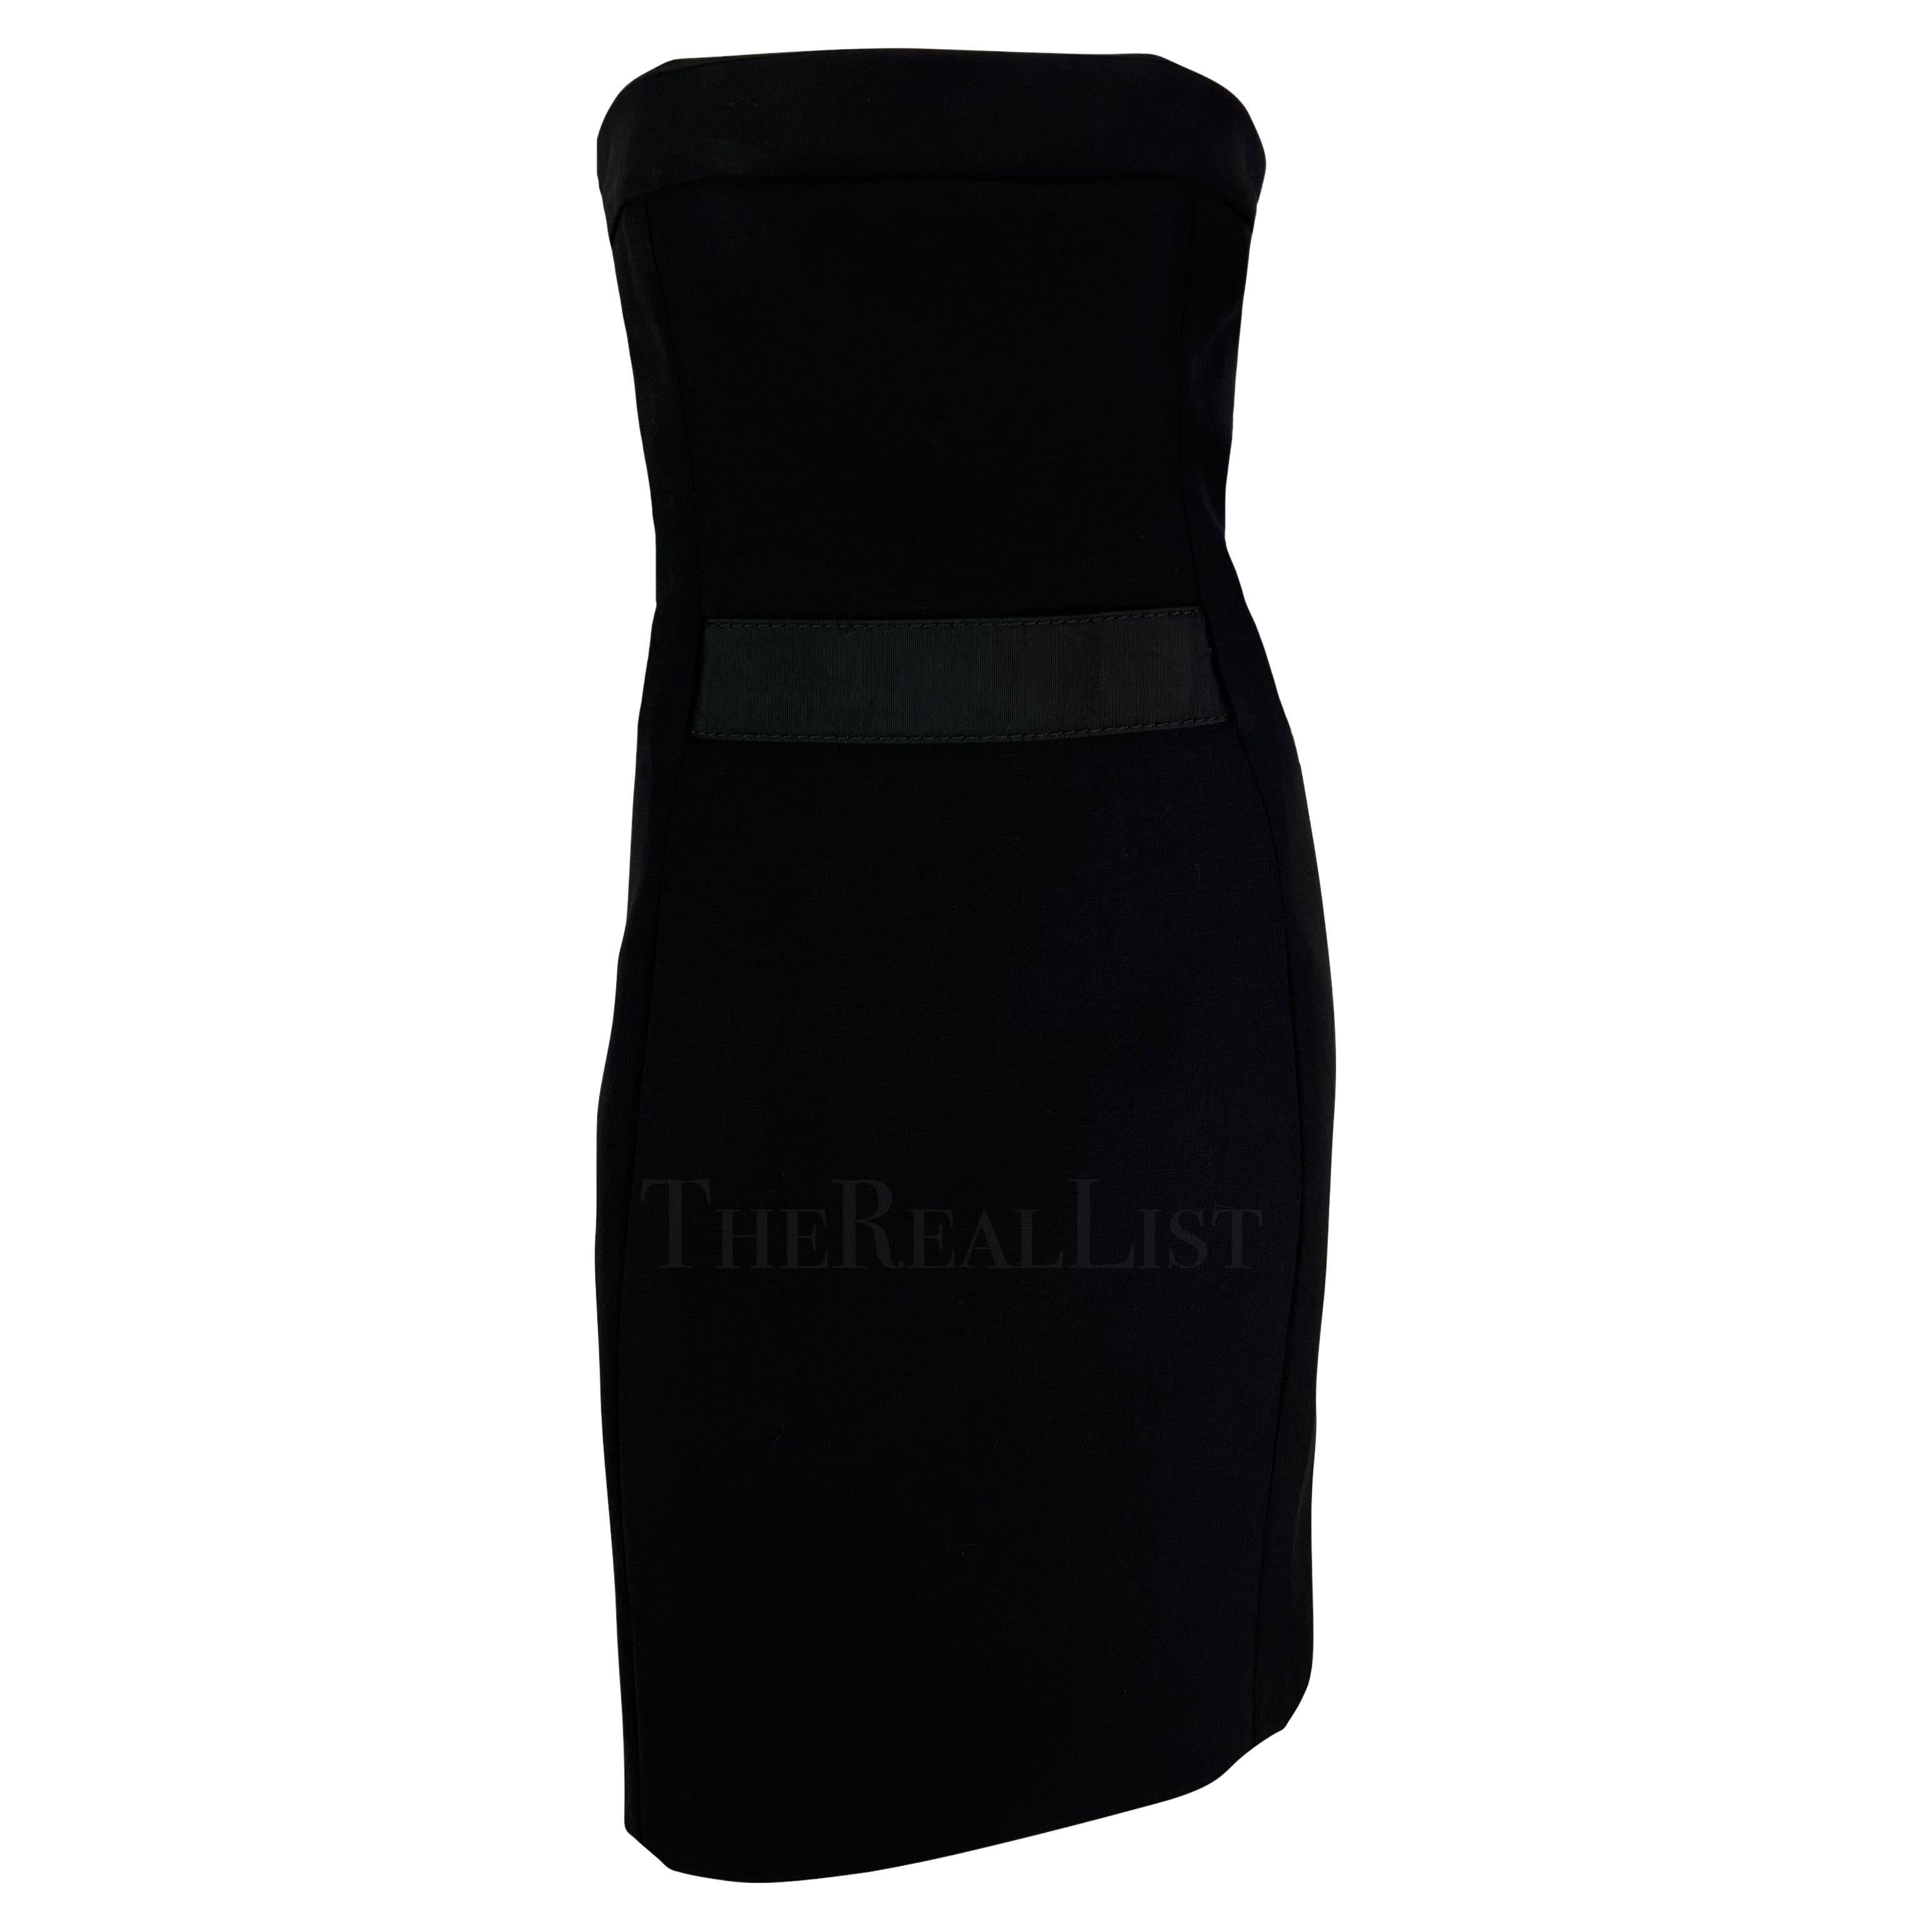 F/W 2001 Gucci by Tom Ford Corseted Black Strapless Tube Mini Dress For Sale 2